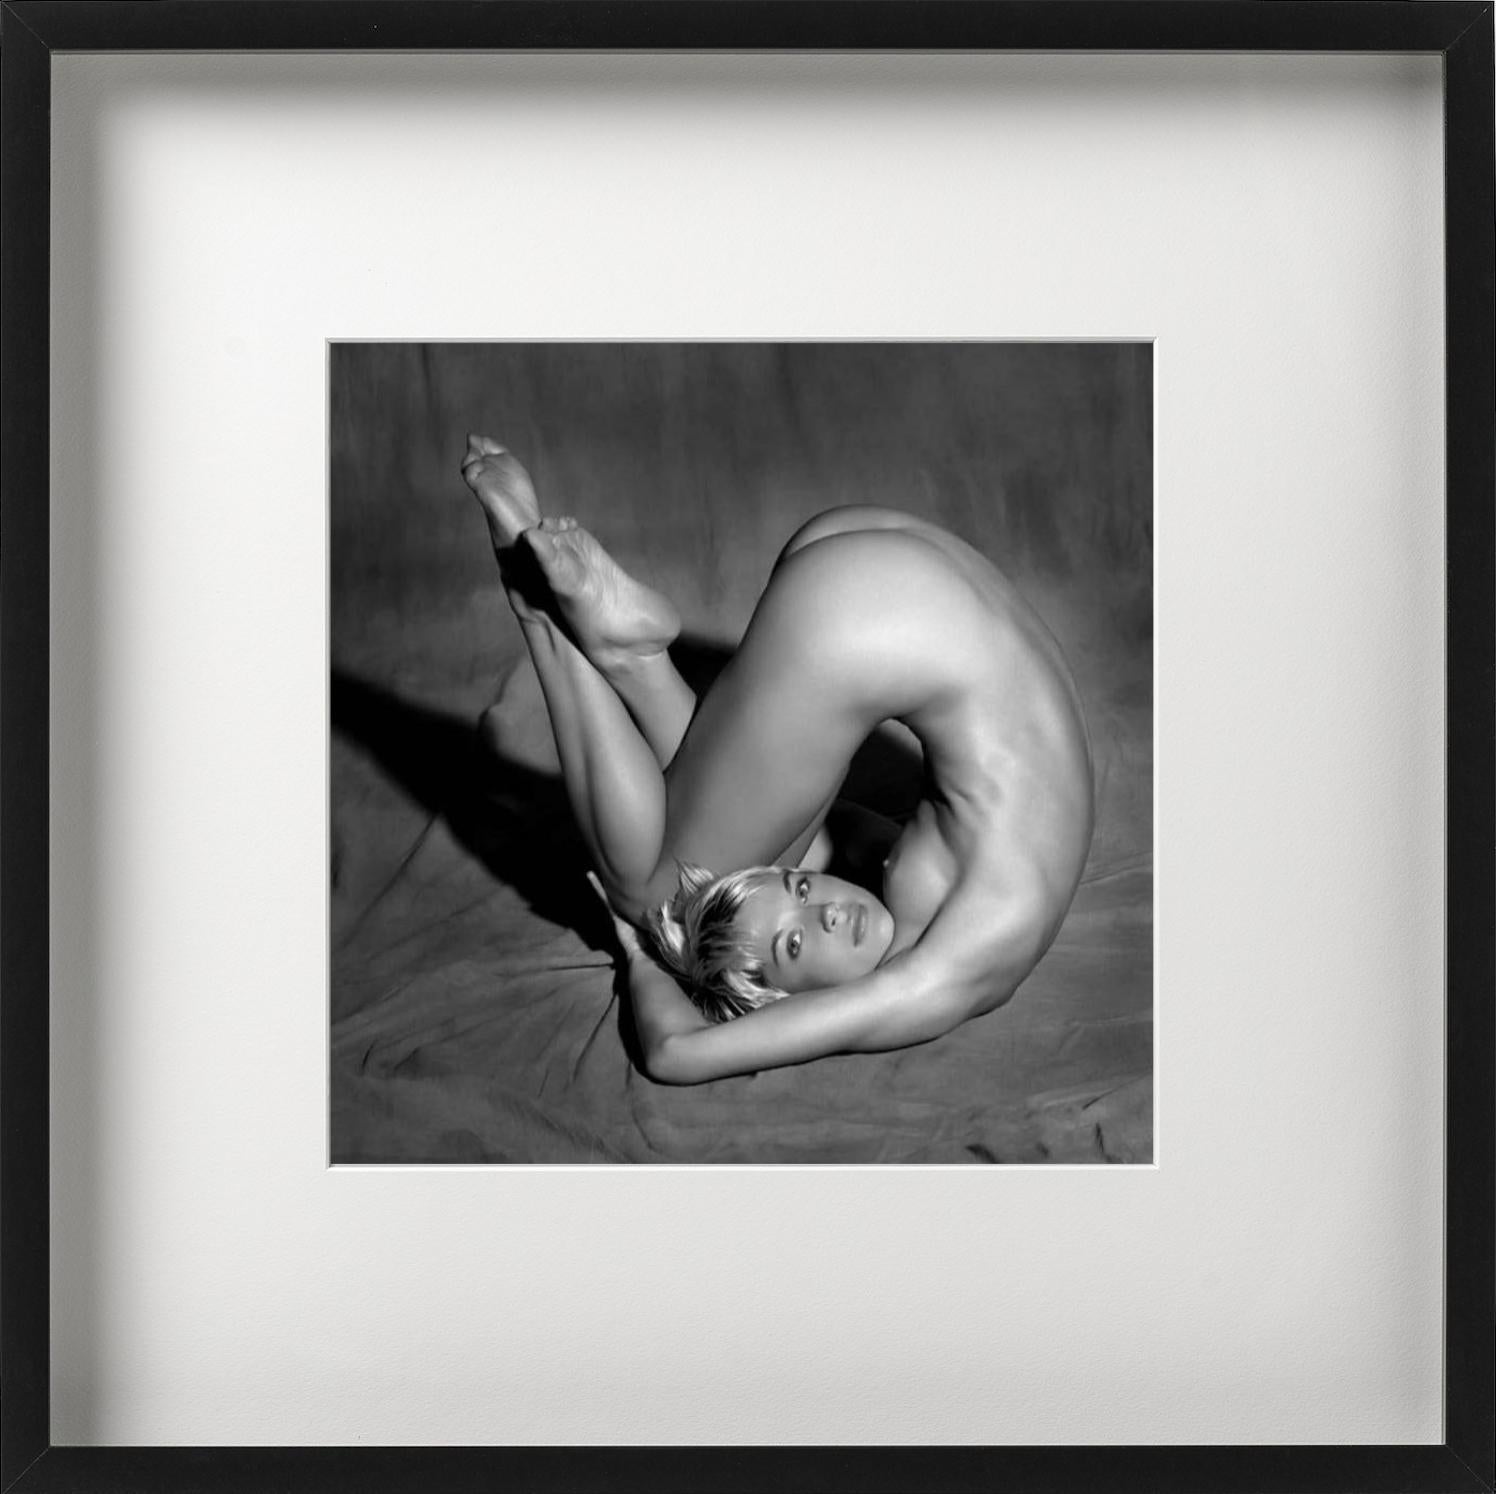 Neither the beginning nor the end - acrobatic nude, fine art photography, 1996 For Sale 3